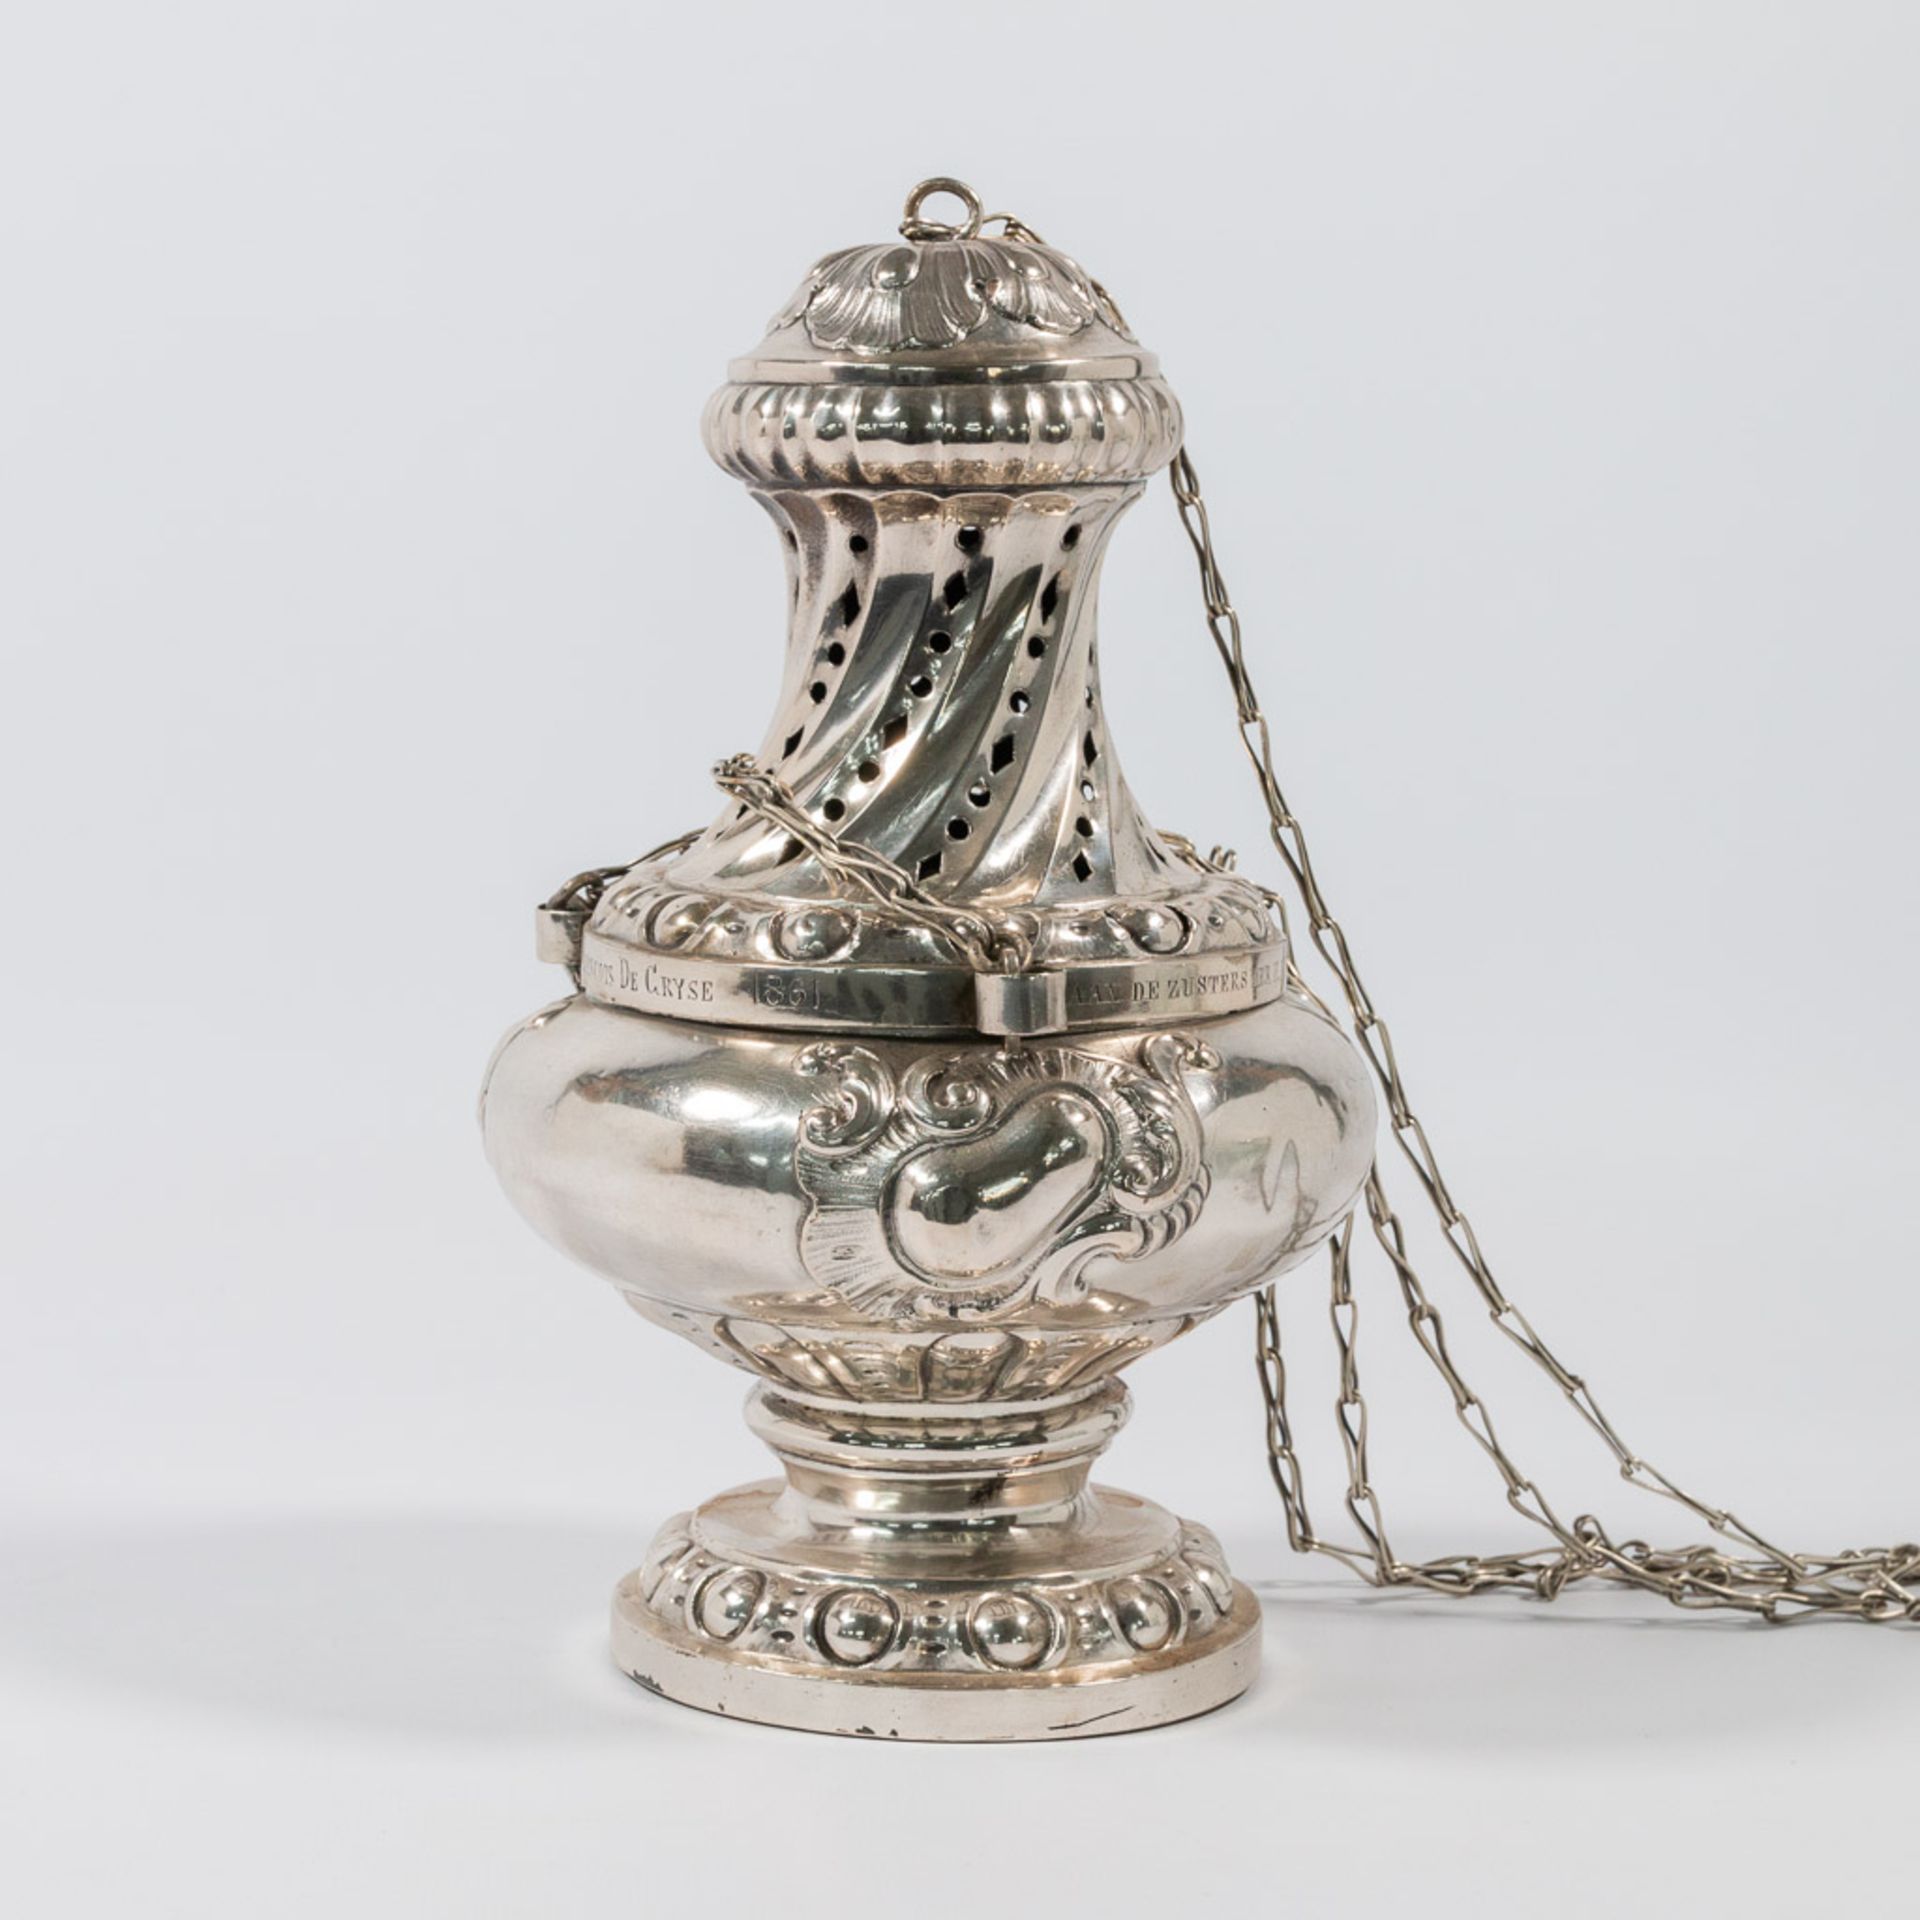 A silver Insence burner and Insence jar. - Image 22 of 39